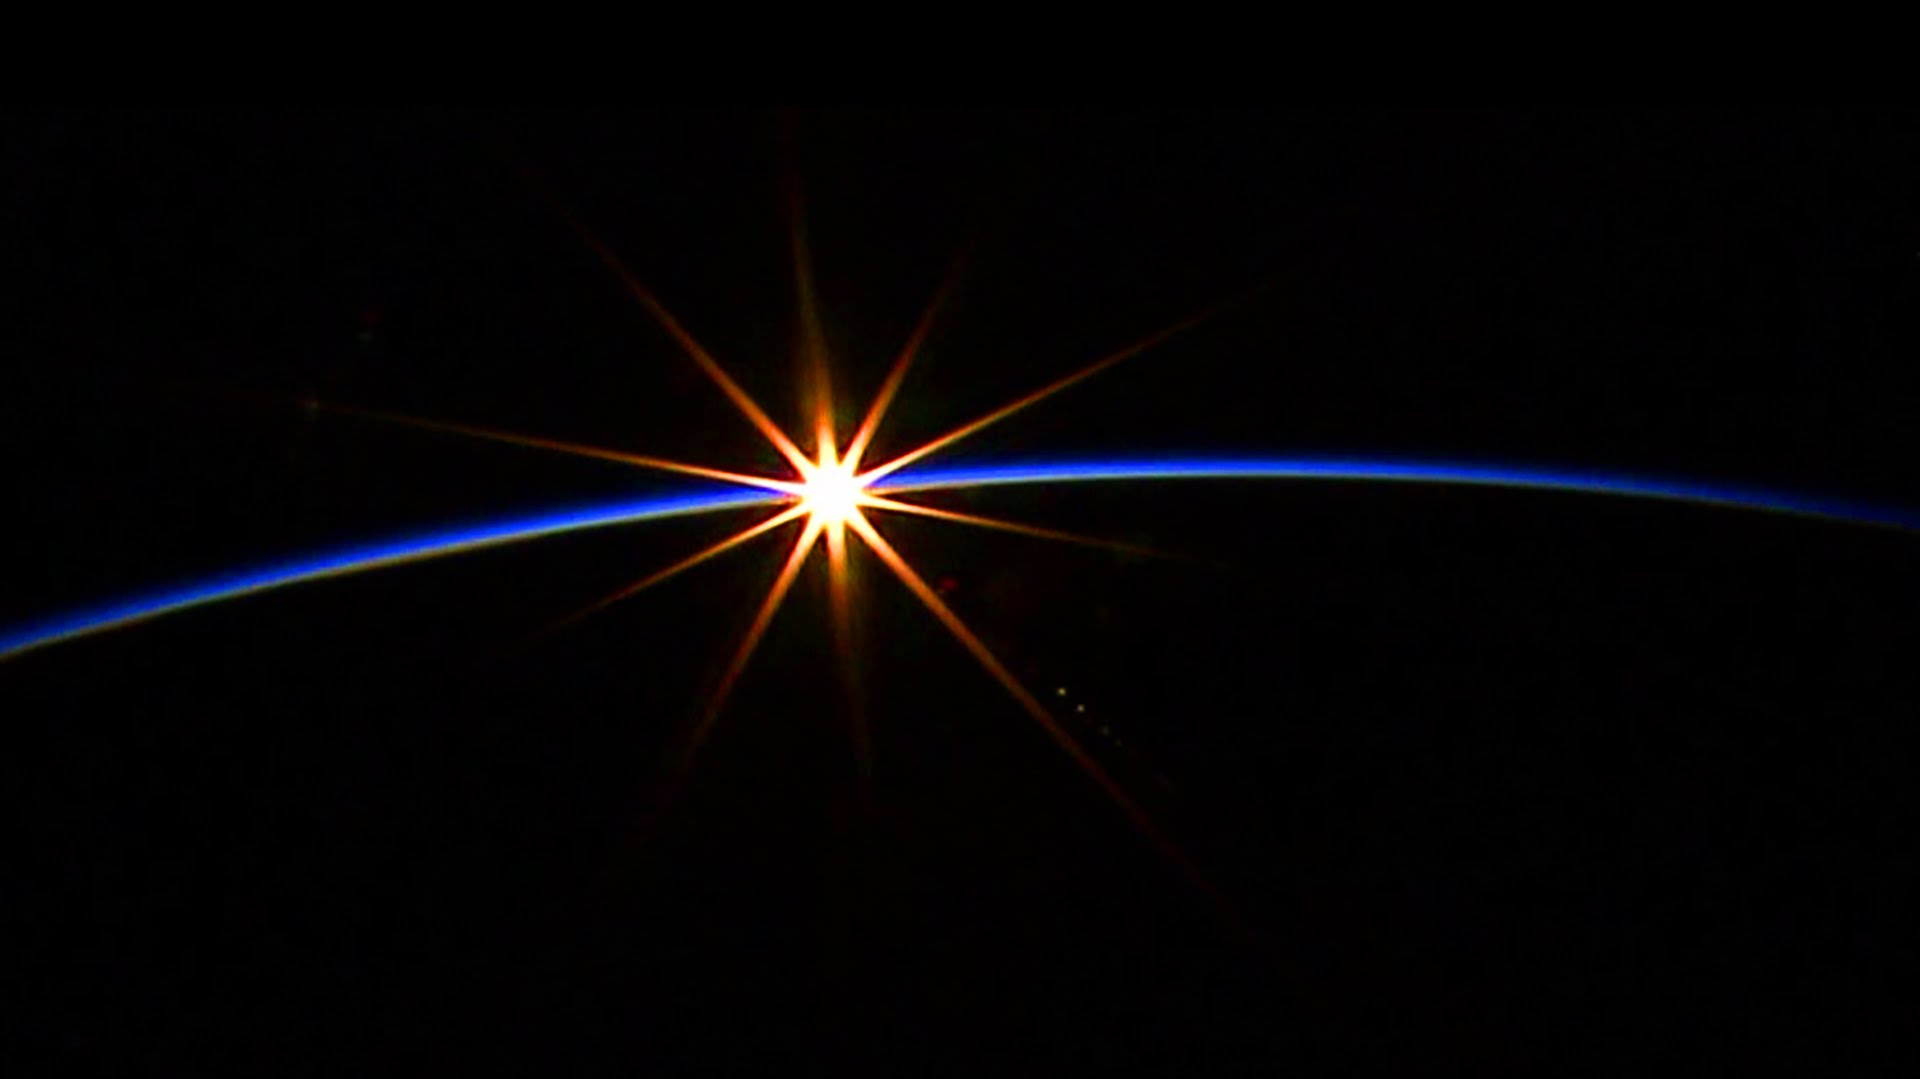 Sunrise seen from space (ISS International Space Station) [HD] - YouTube